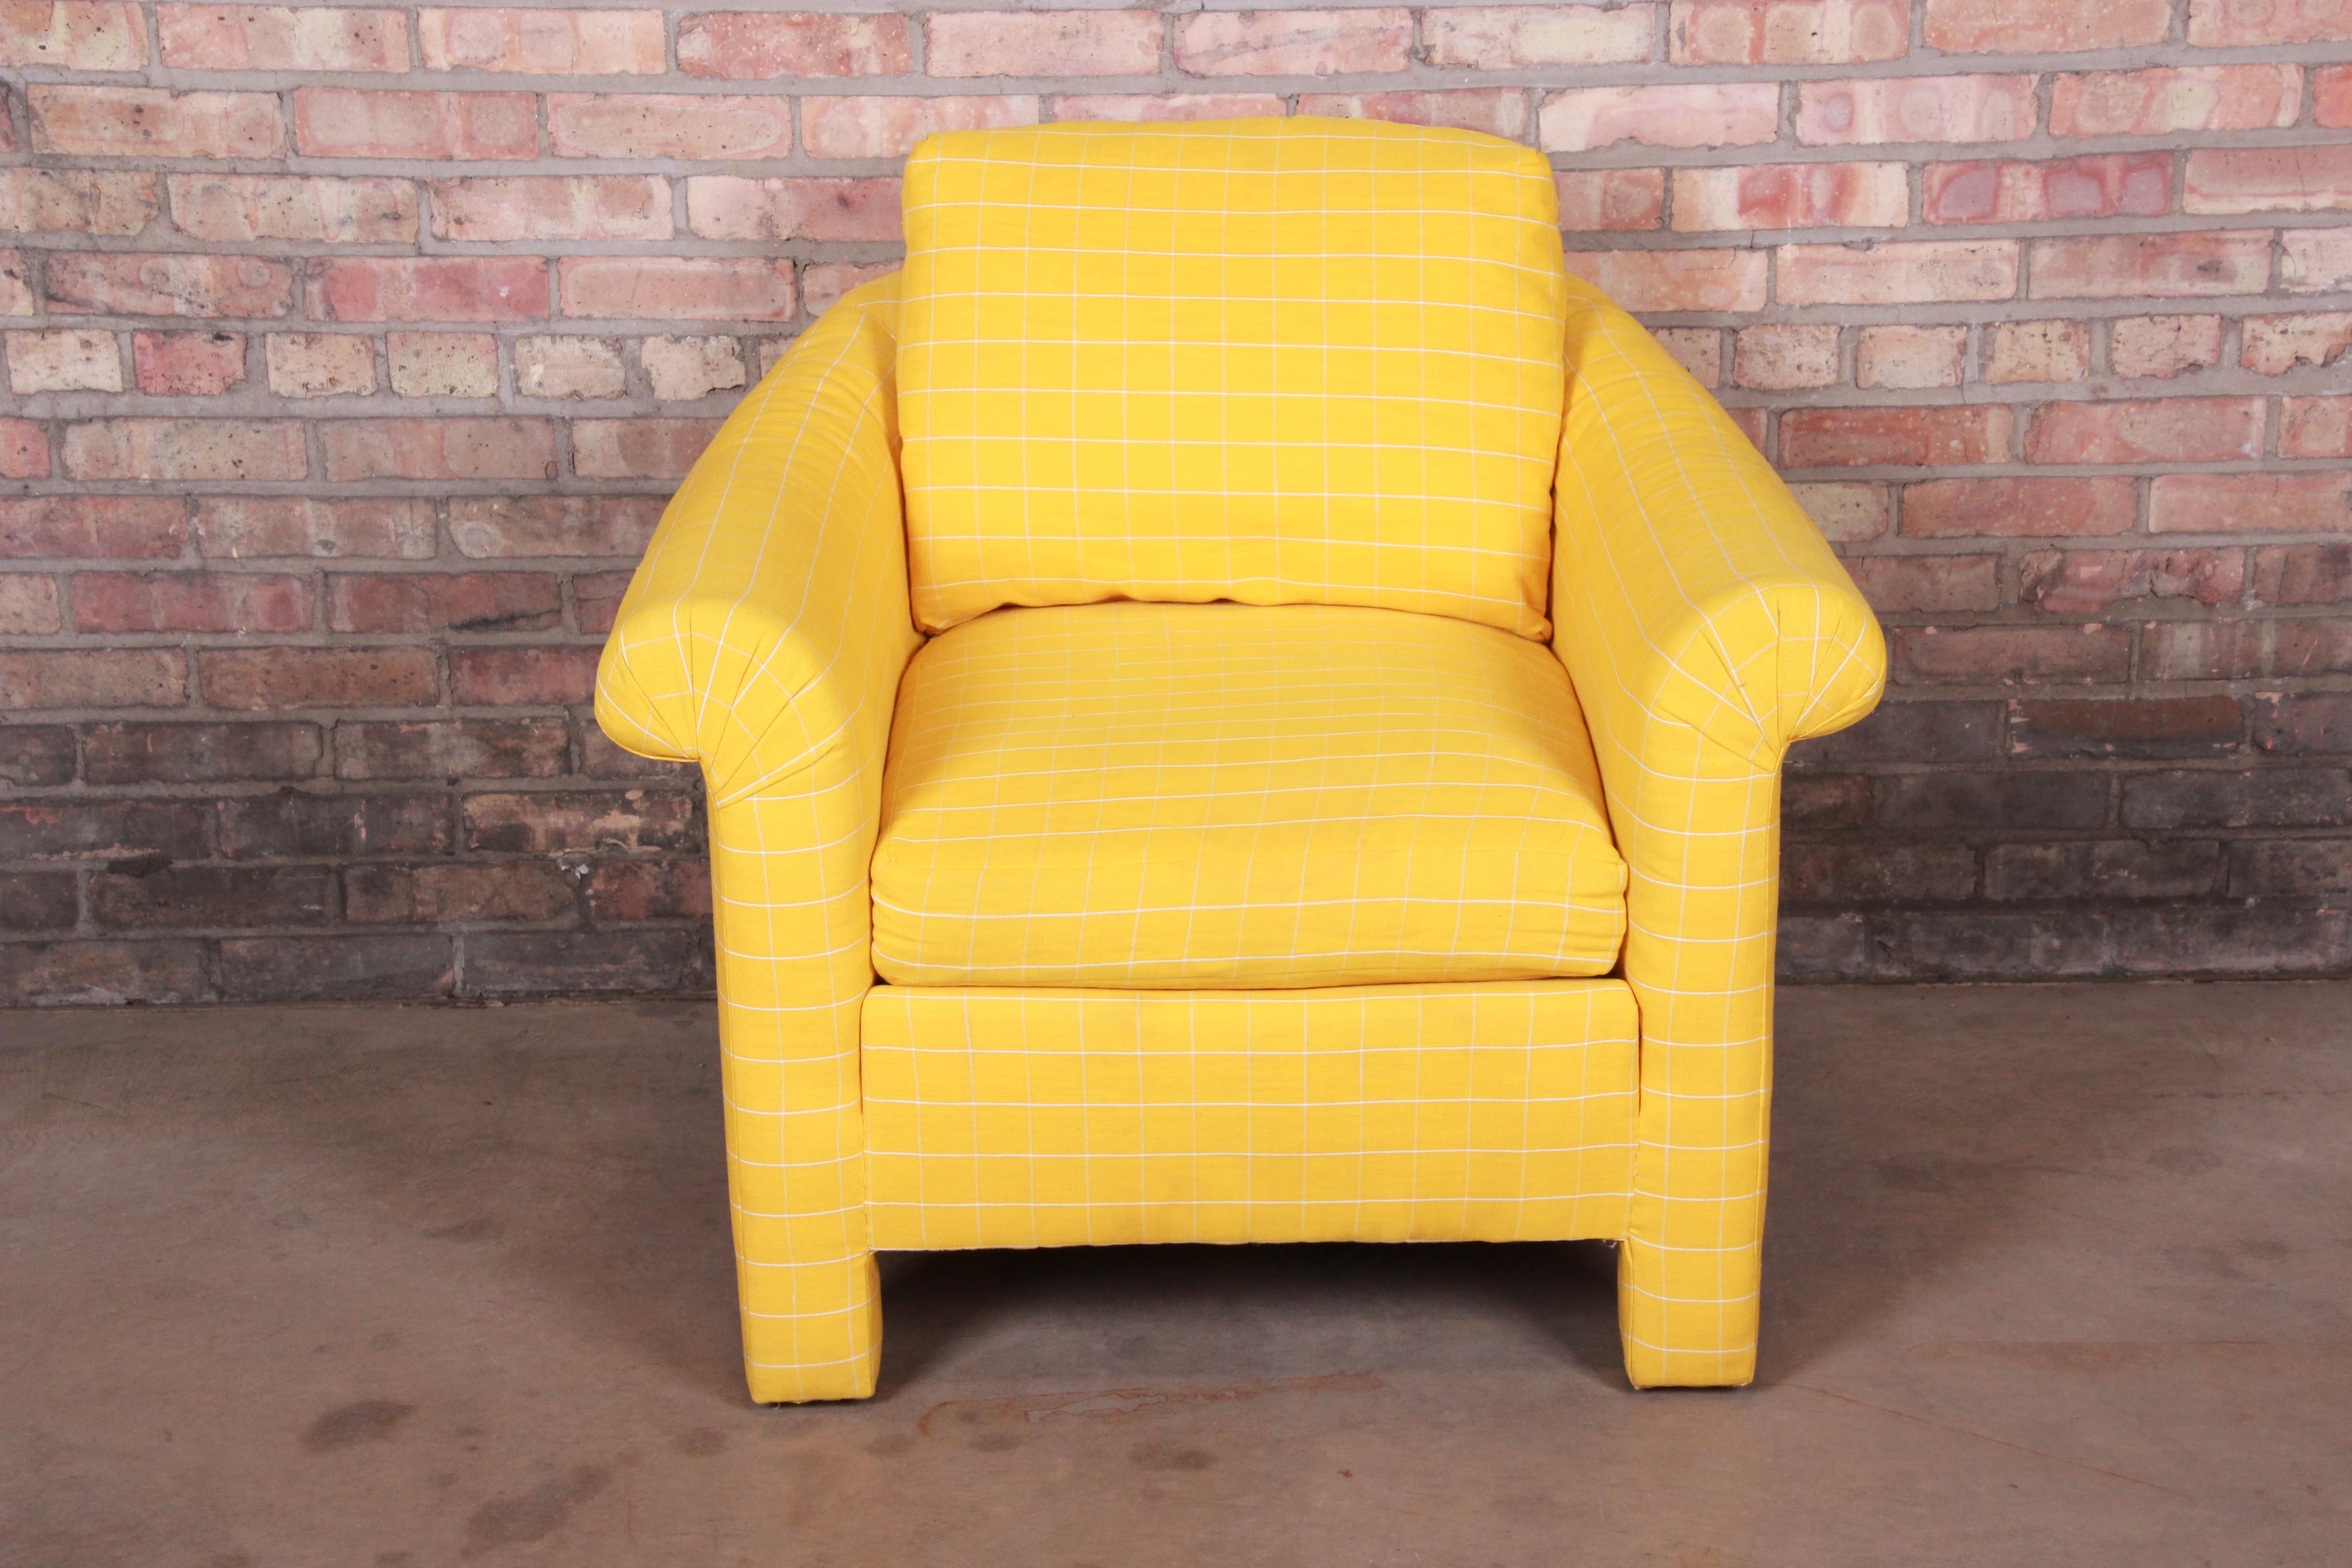 An exceptional modern down-filled club or lounge chair in vibrant yellow upholstery

By Baker Furniture

USA, 20th century

Measures: 36